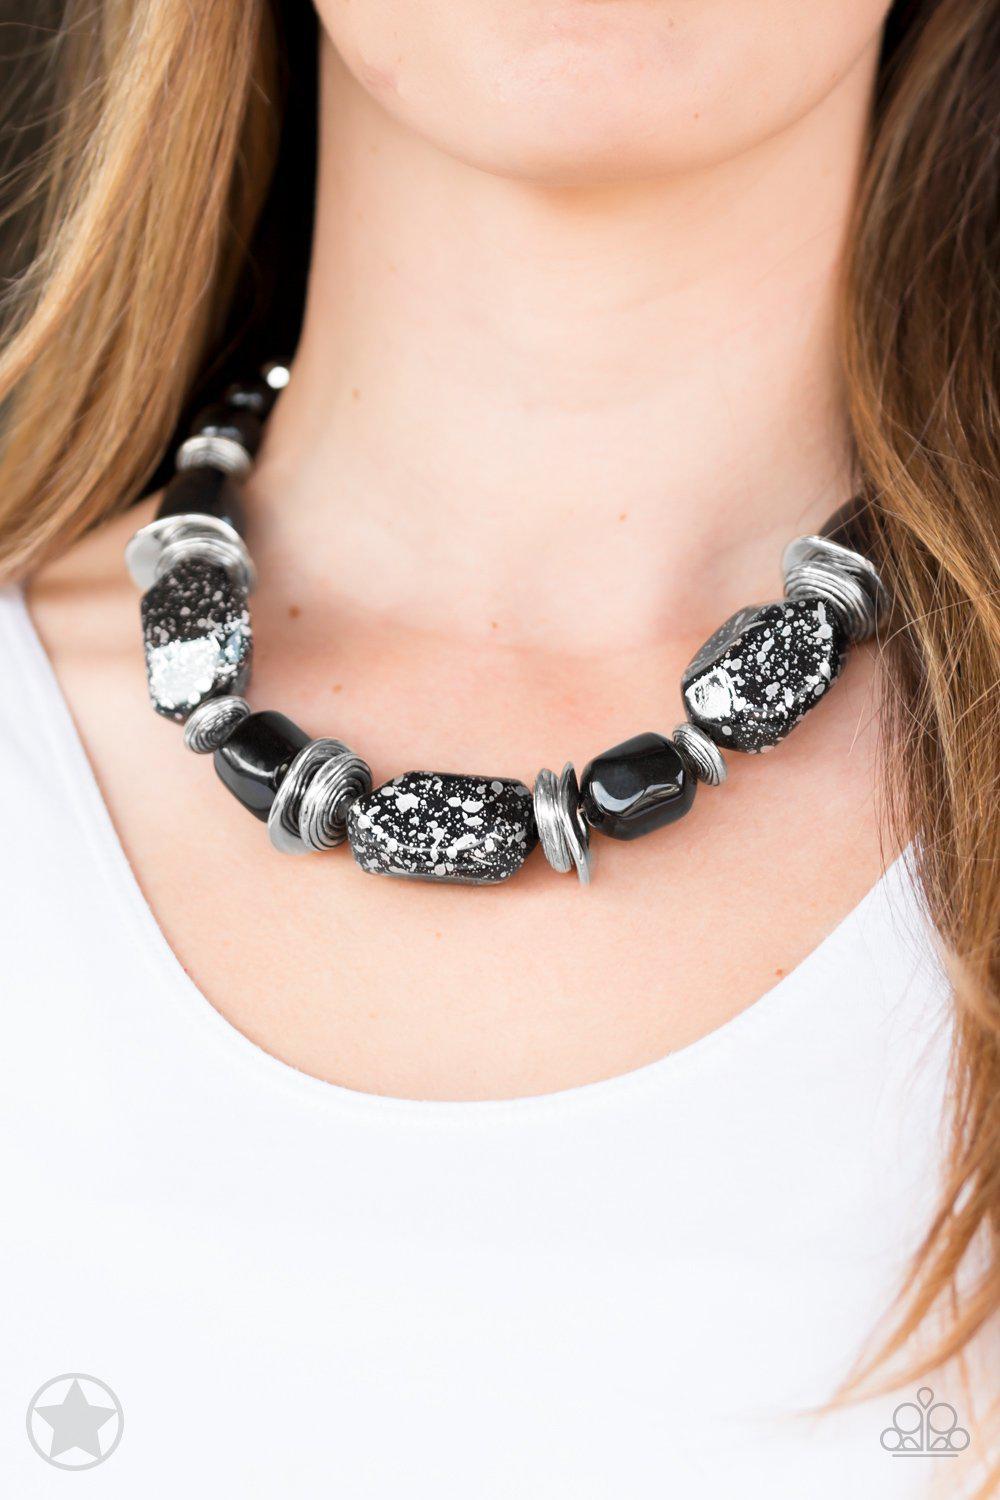 In Good Glazes Chunky Black Necklace and matching Earrings - Paparazzi Accessories- stylized on model - CarasShop.com - $5 Jewelry by Cara Jewels